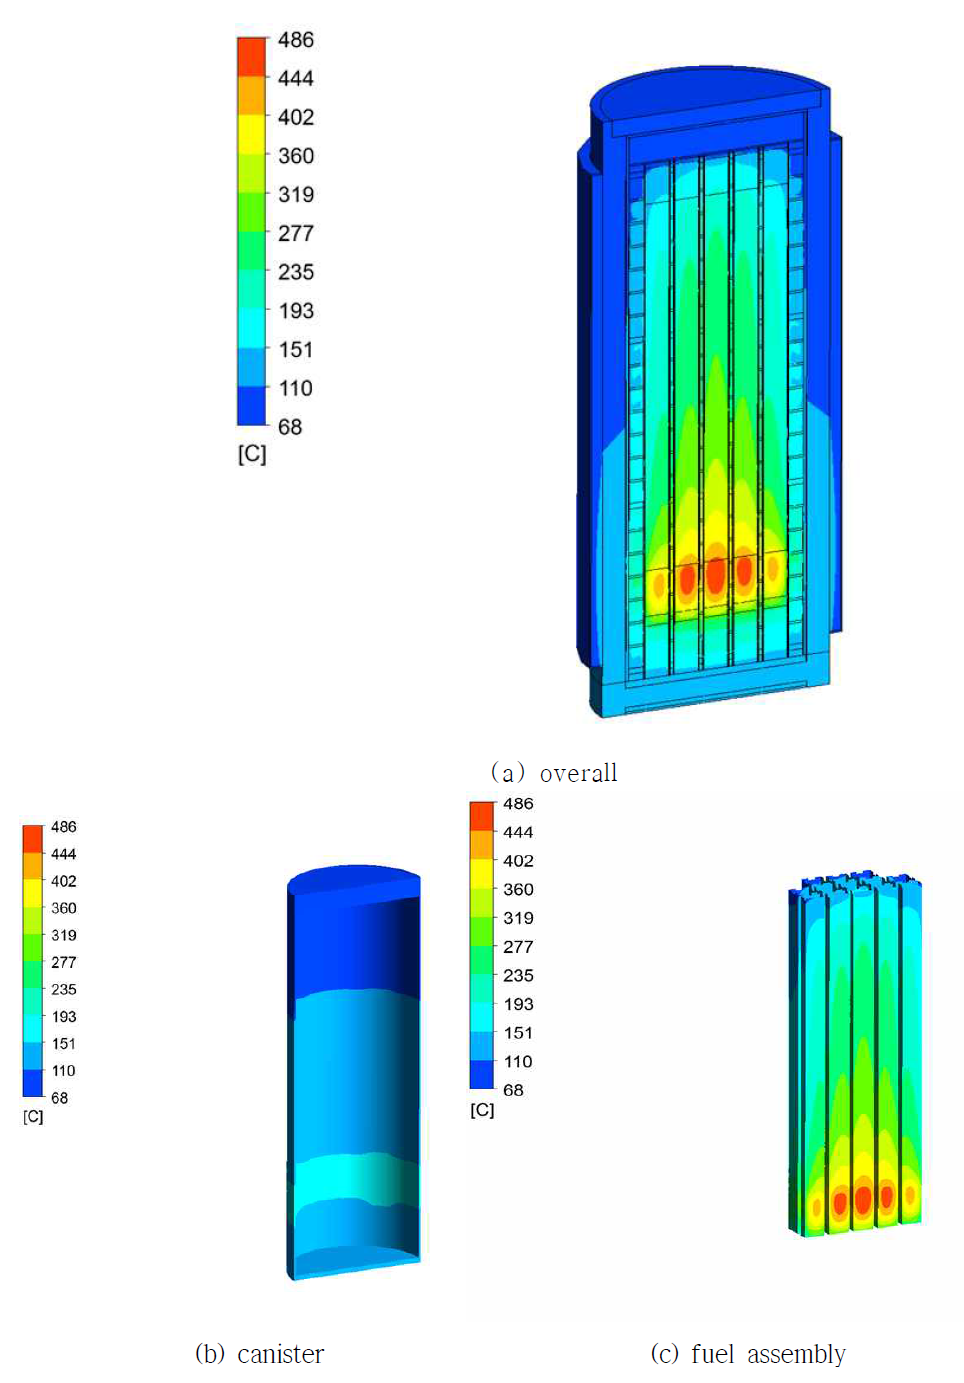 CFD results for accident(50% fuel pellet outflow) conditions